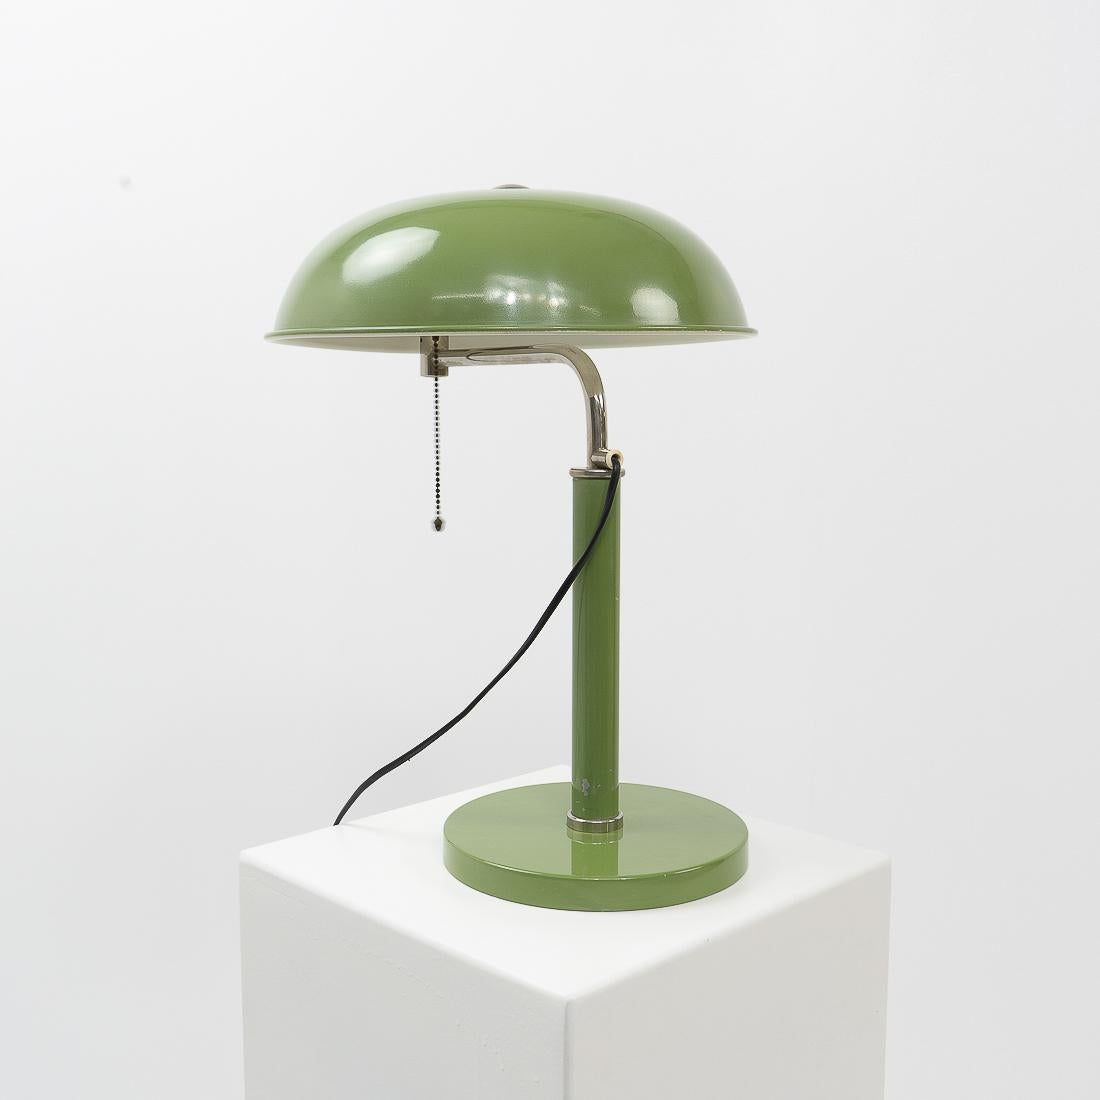 Aluminum “1500” Table Lamp by Alfred Müller for Belmag AG, Switzerland, 1950s For Sale